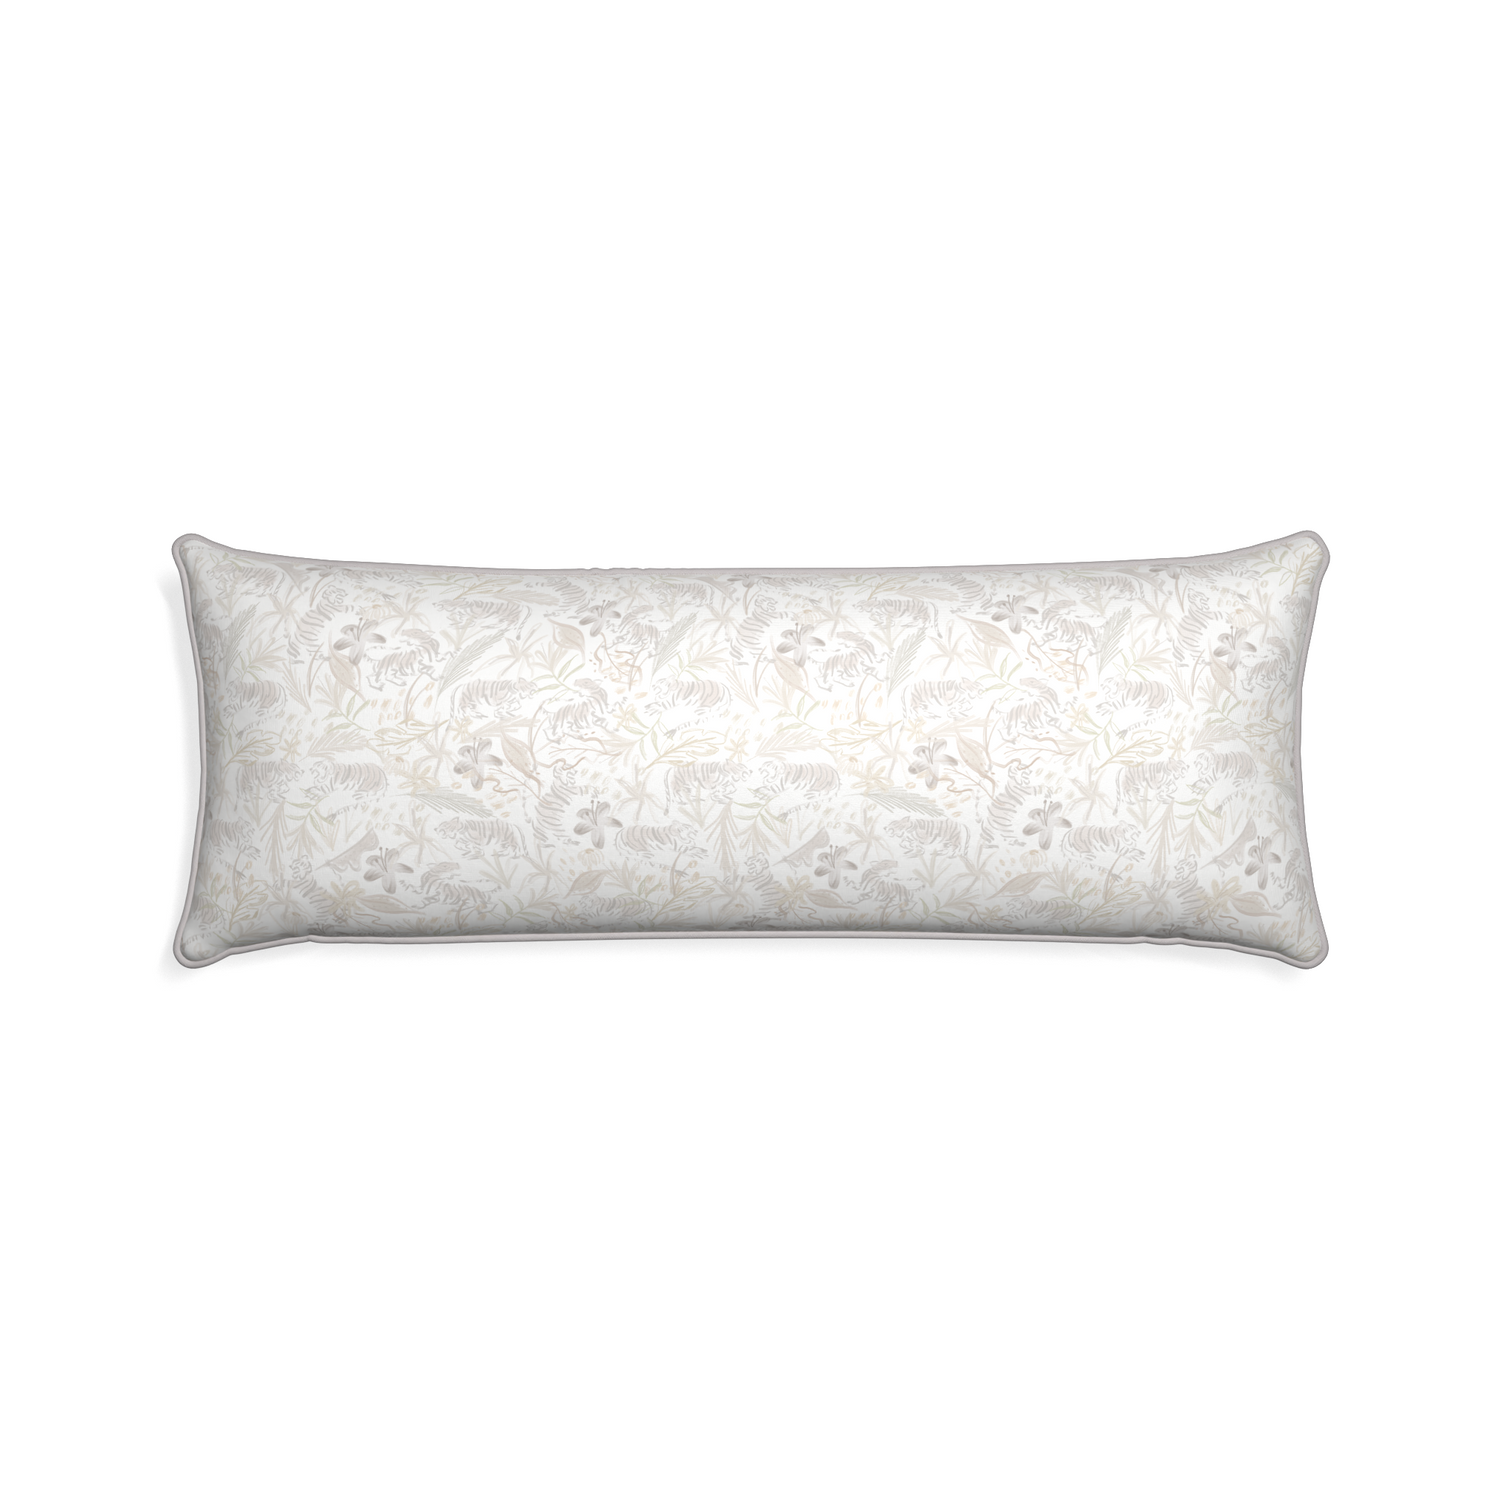 Xl-lumbar frida sand custom pillow with pebble piping on white background